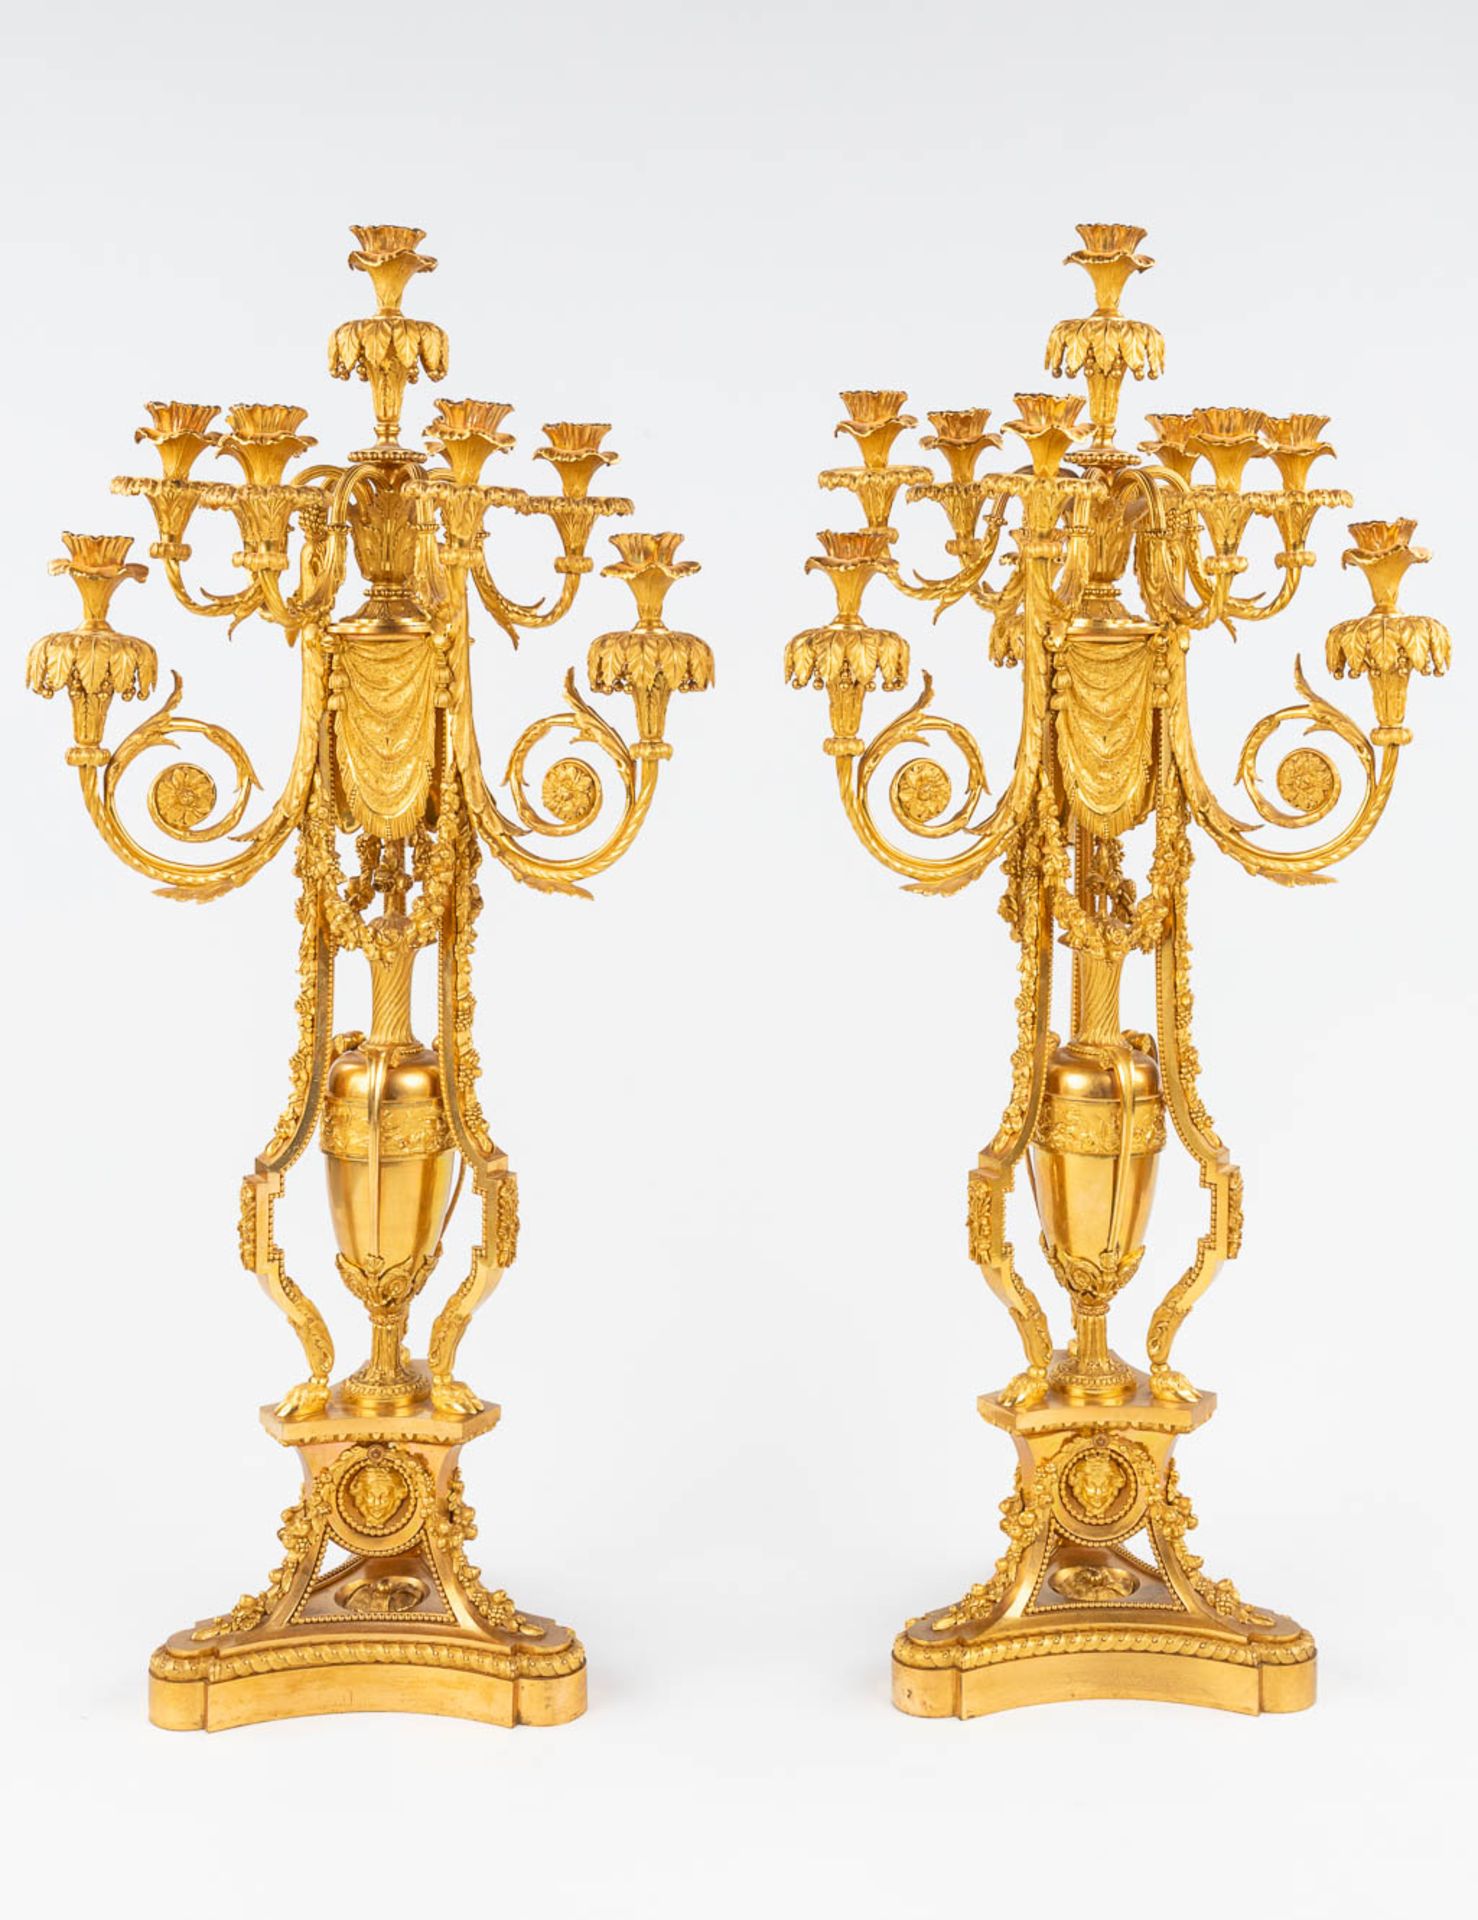 An imposing three-piece mantle garniture clock and candelabra, gilt bronze in Louis XVI style. Maiso - Image 26 of 38